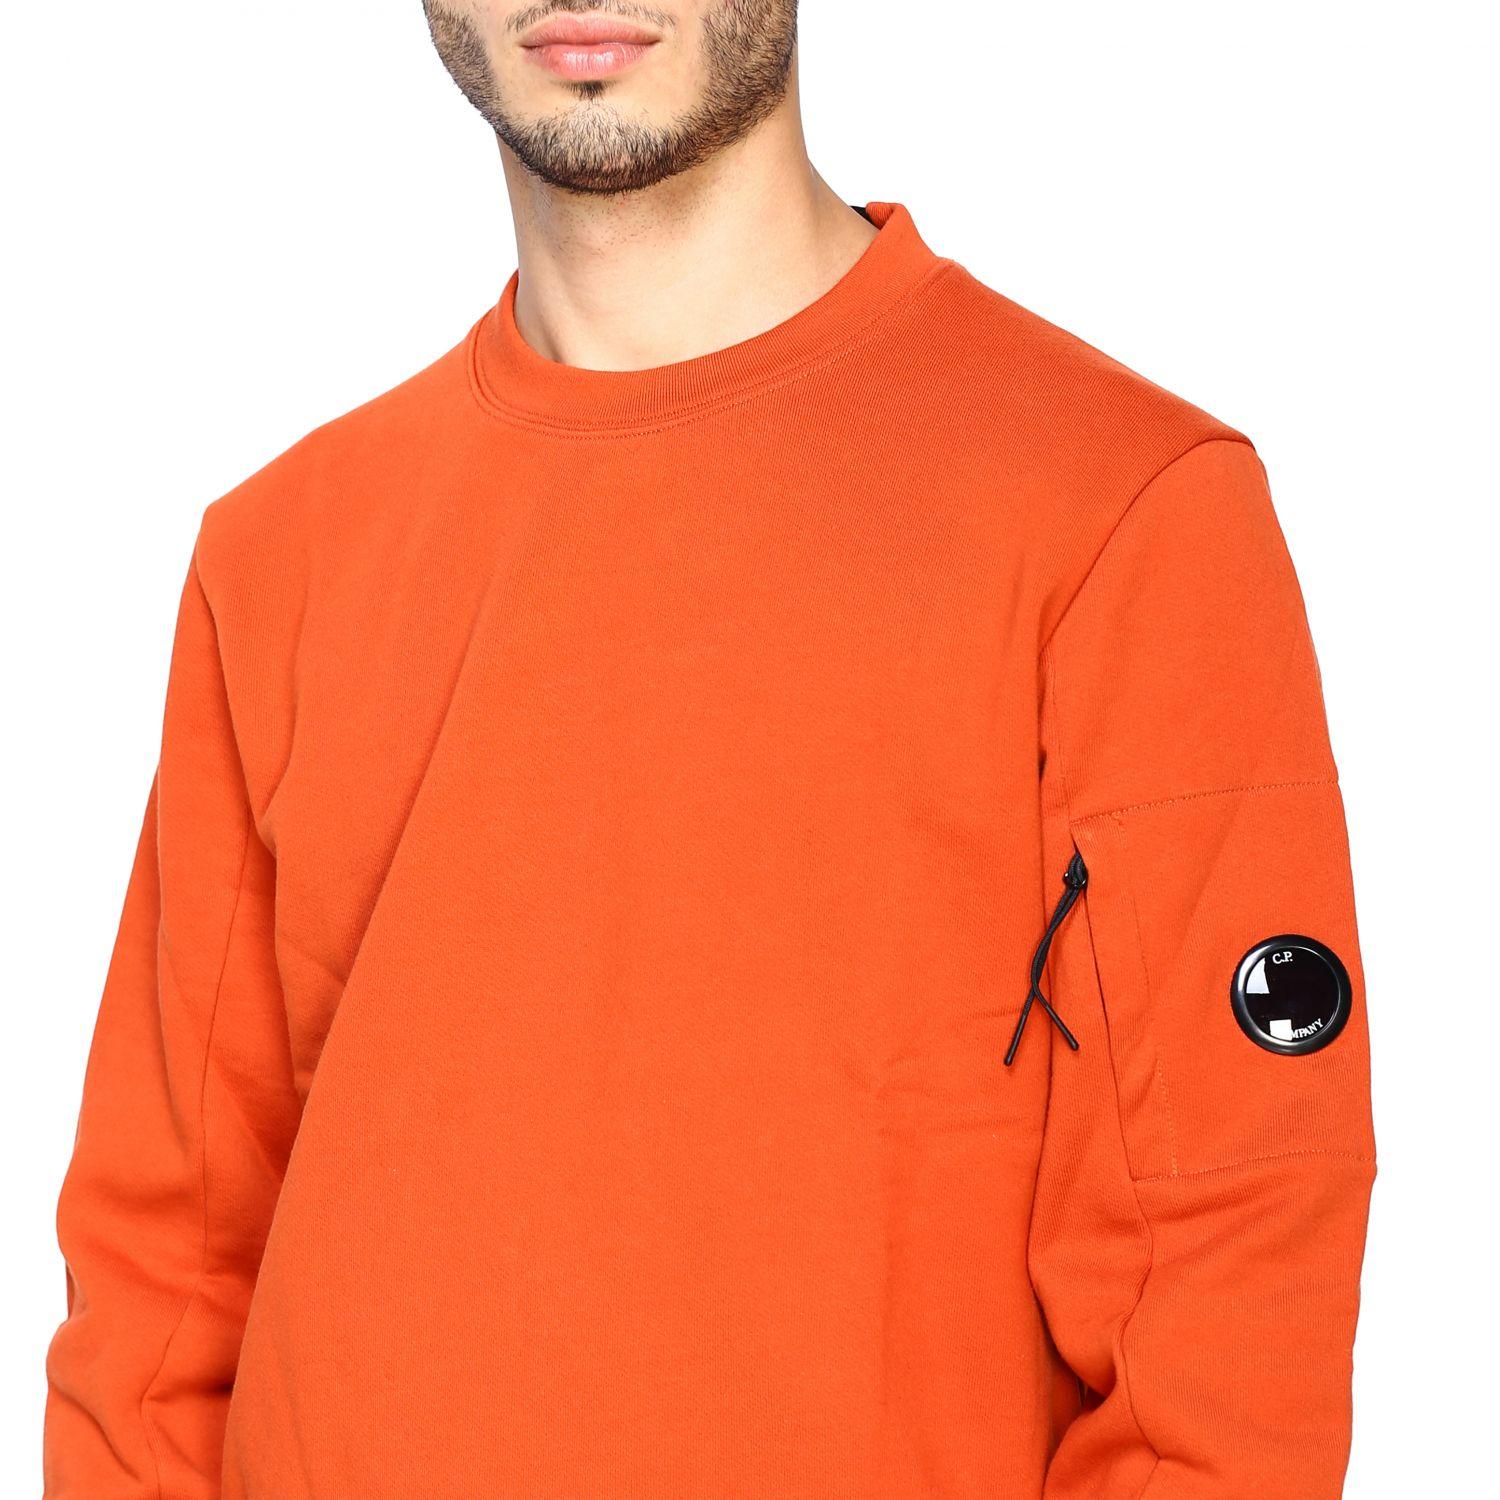 Company Cotton Crewneck Sweatshirt in Orange,Yellow gym and workout clothes gym and workout clothes C.P Save 37% C.P Company Activewear for Men Mens Activewear Orange 